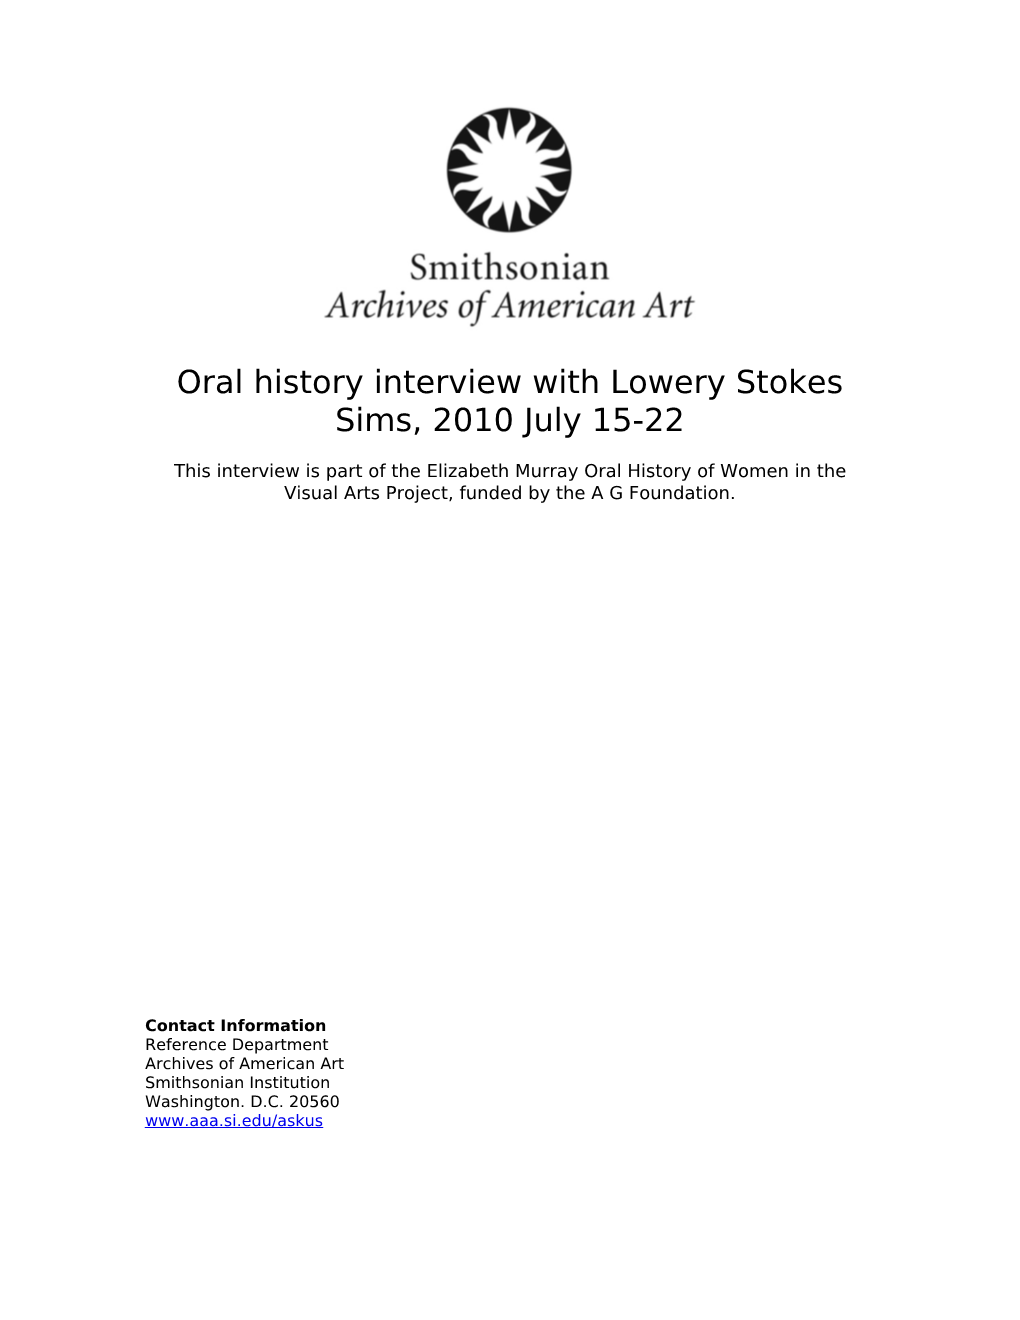 Oral History Interview with Lowery Stokes Sims, 2010 July 15-22